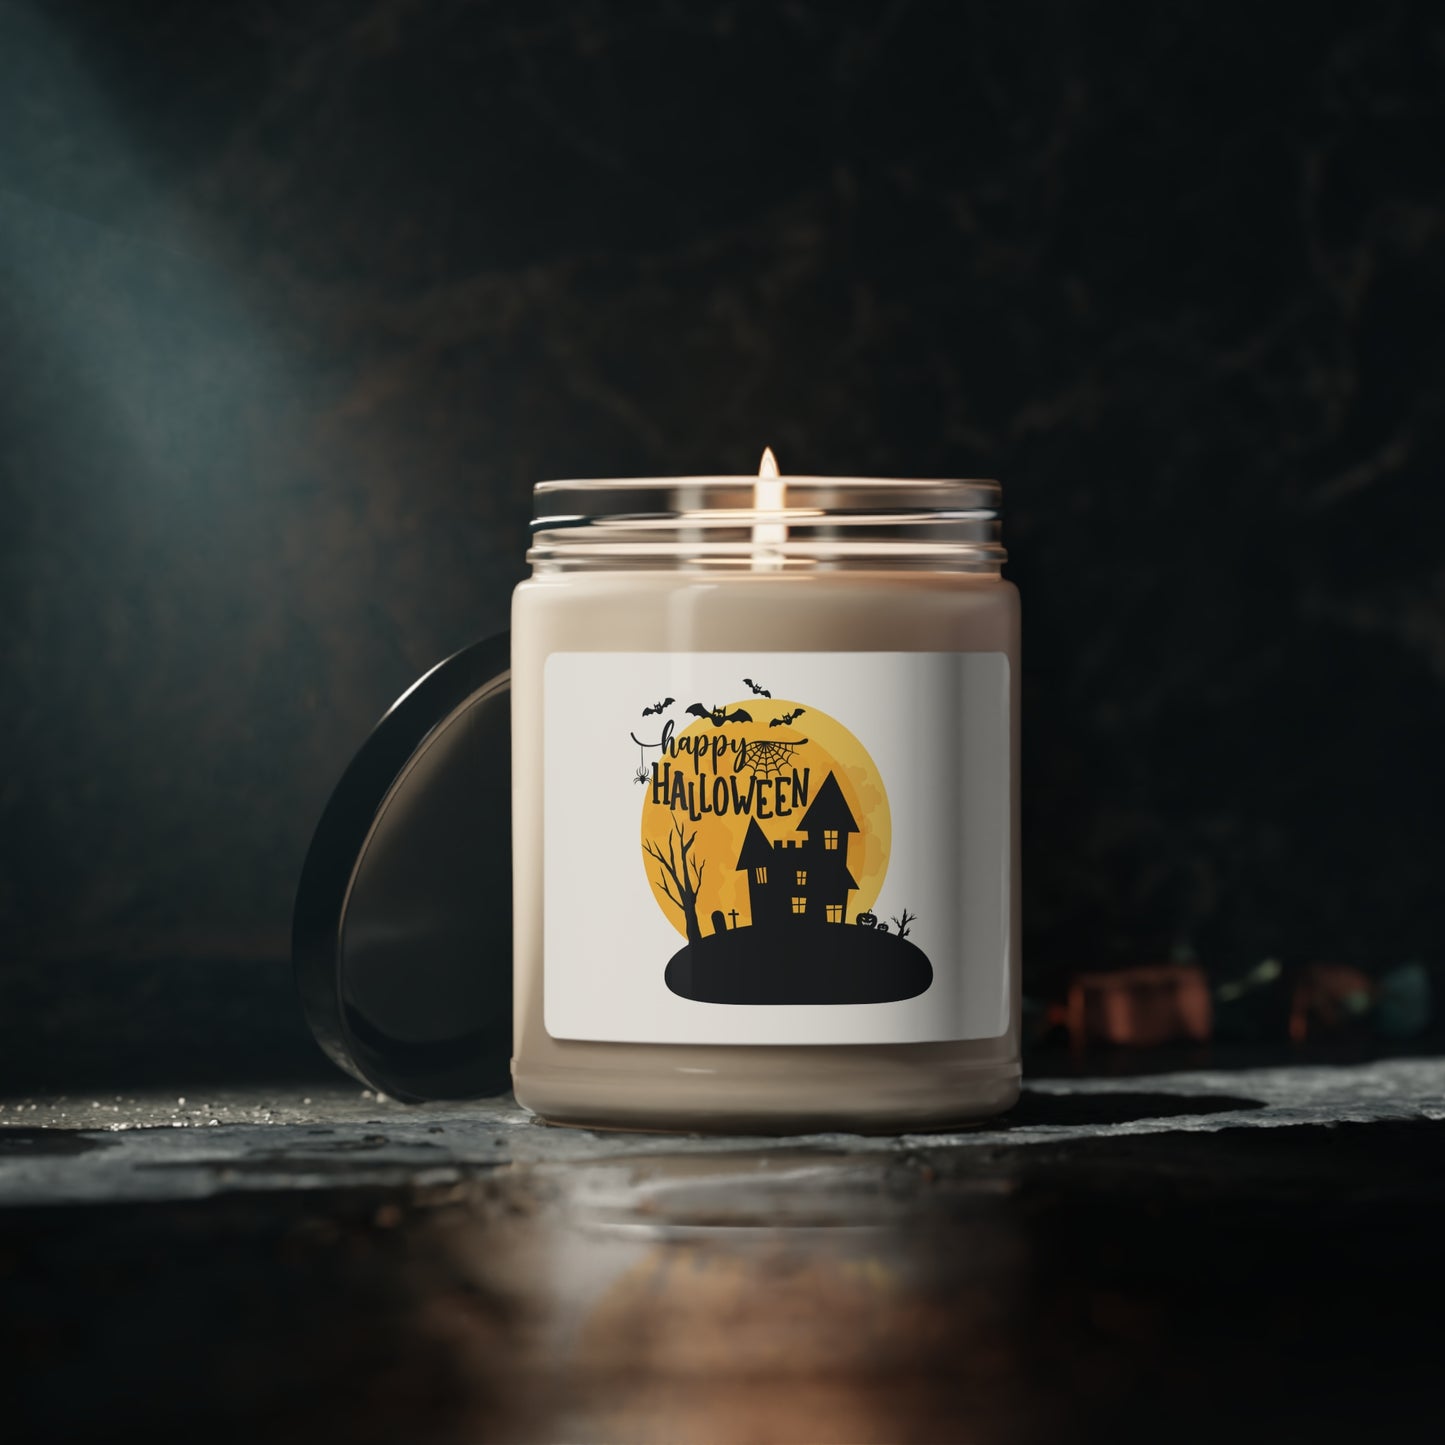 Happy Halloween Scented Soy Candle 9oz